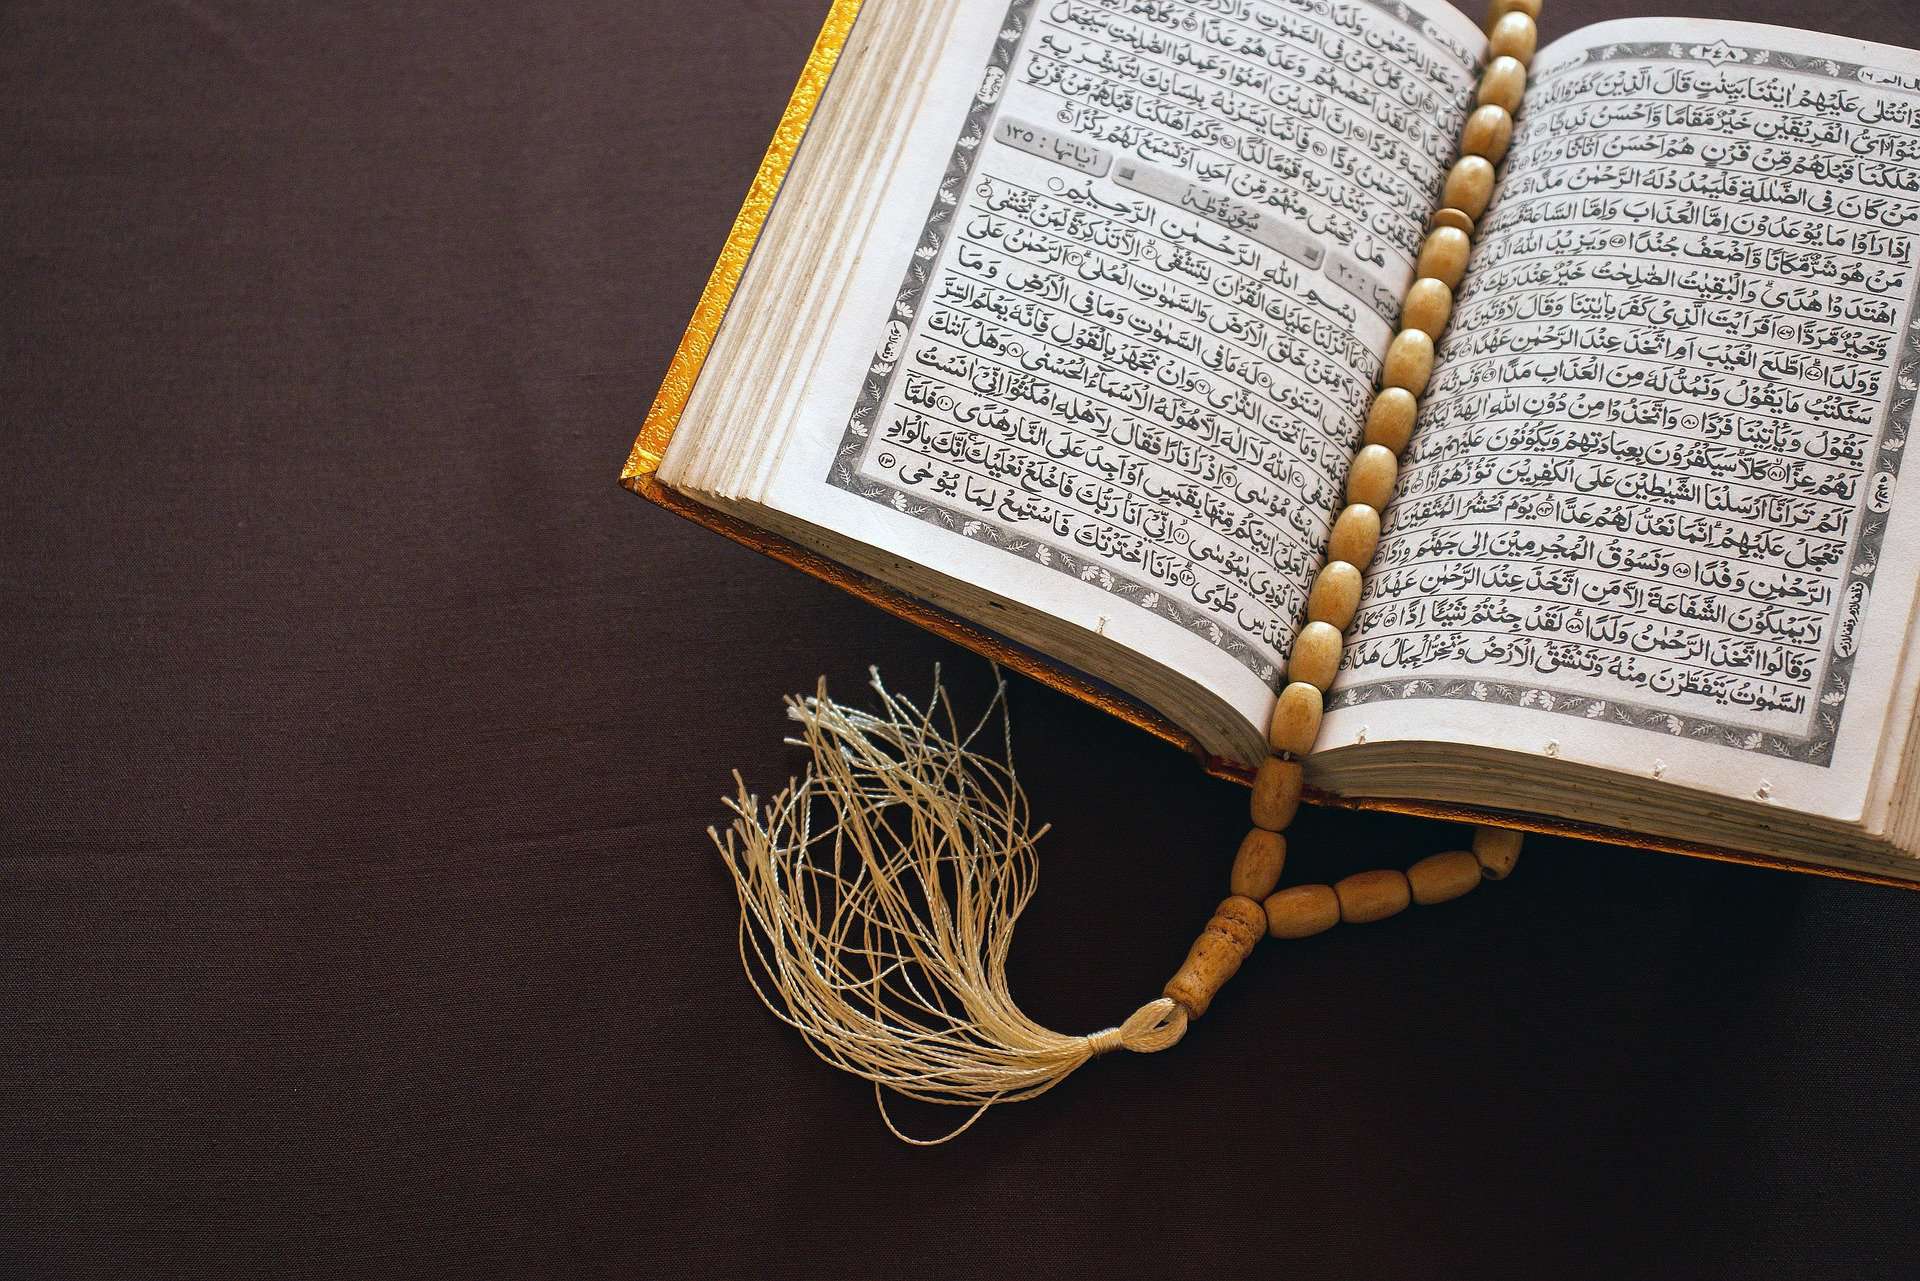 12 FACTS ABOUT THE QURAN